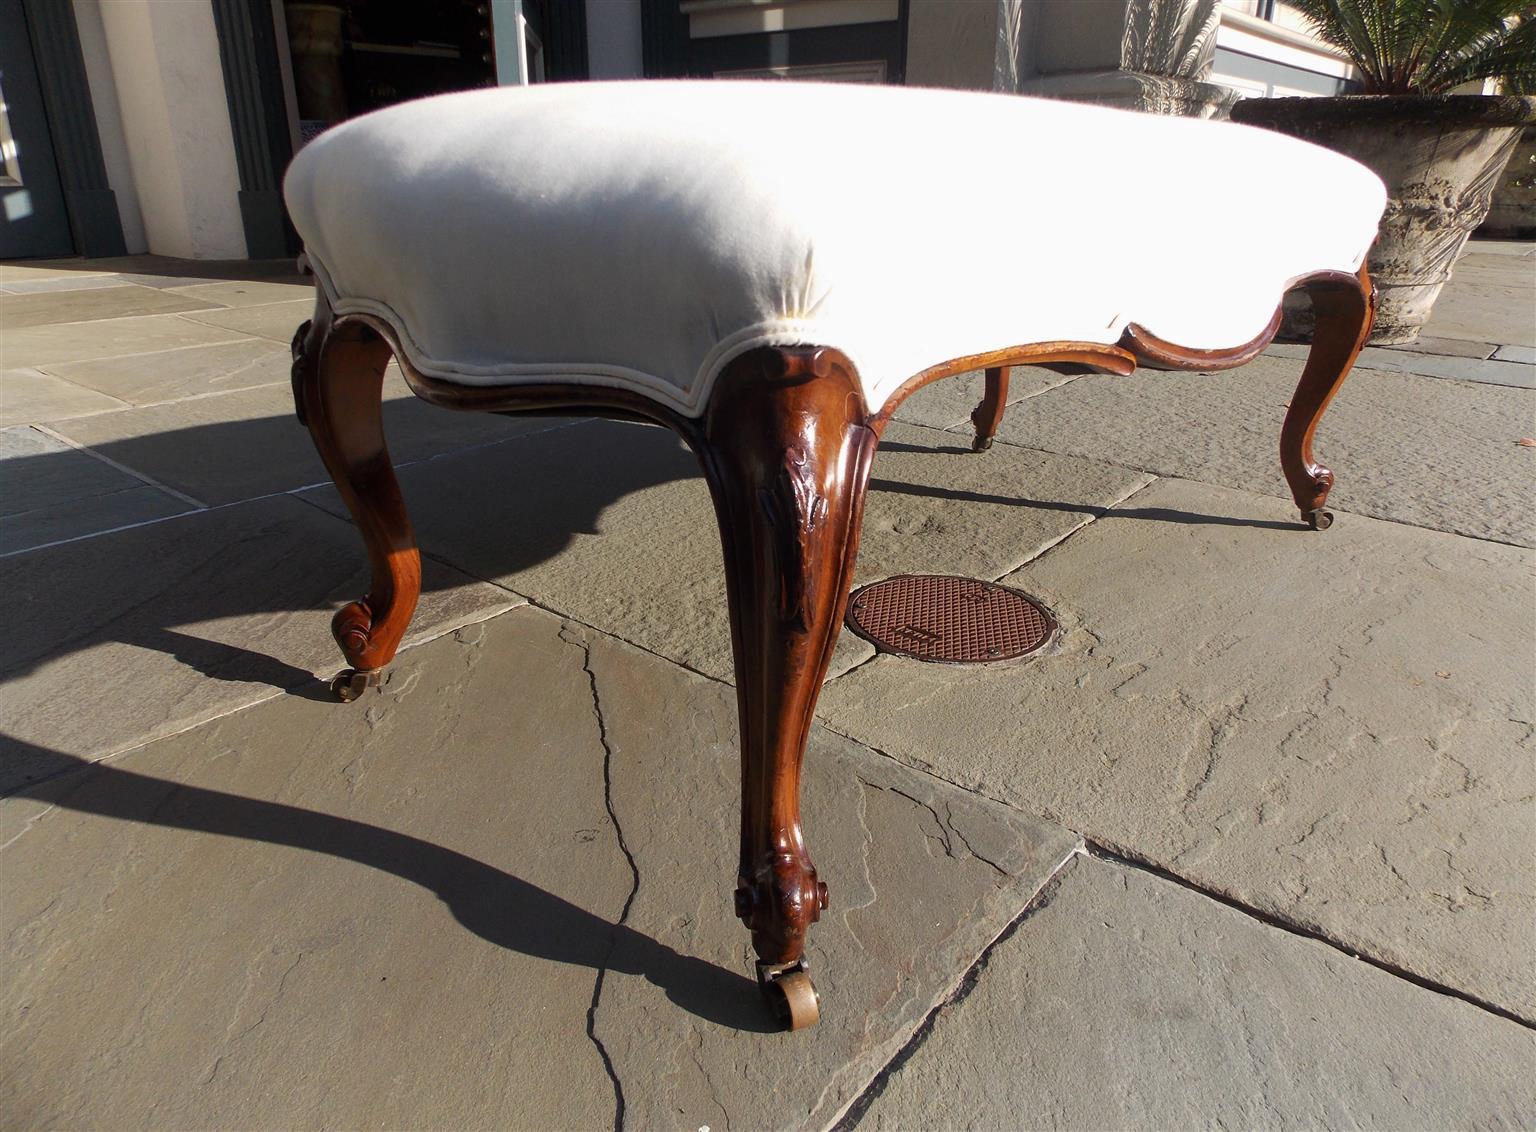 French Regency mahogany upholstered bench with serpentine skirt, foliage carved knee, and terminating on the original brass casters. Bench is covered in white muslin with horse hair and cotton padding, Early 19th century.